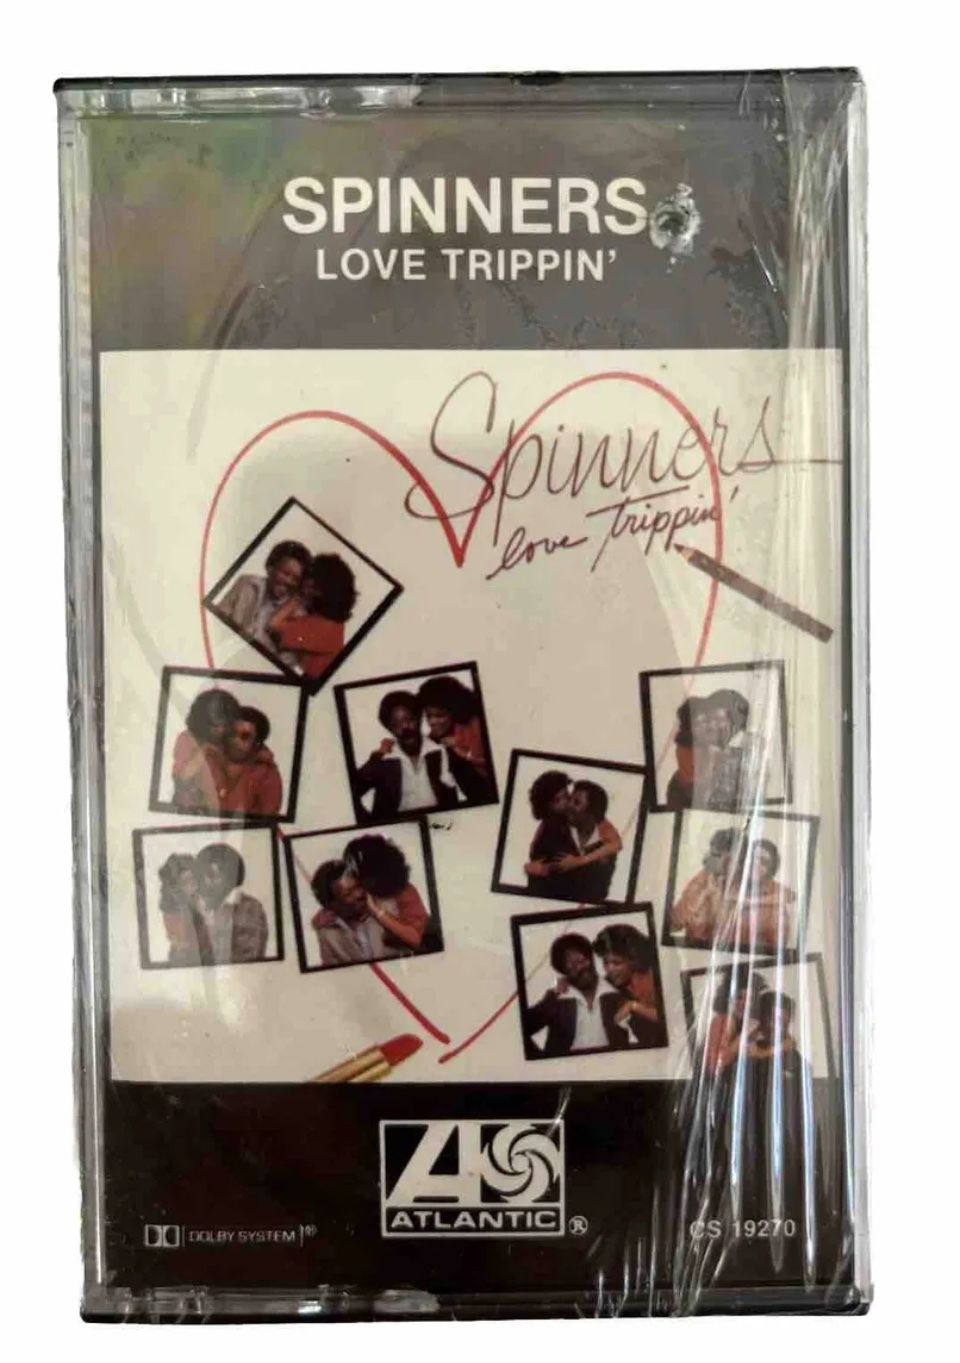 Love Trippin' by The Spinners Cassette Tape Factory Sealed.